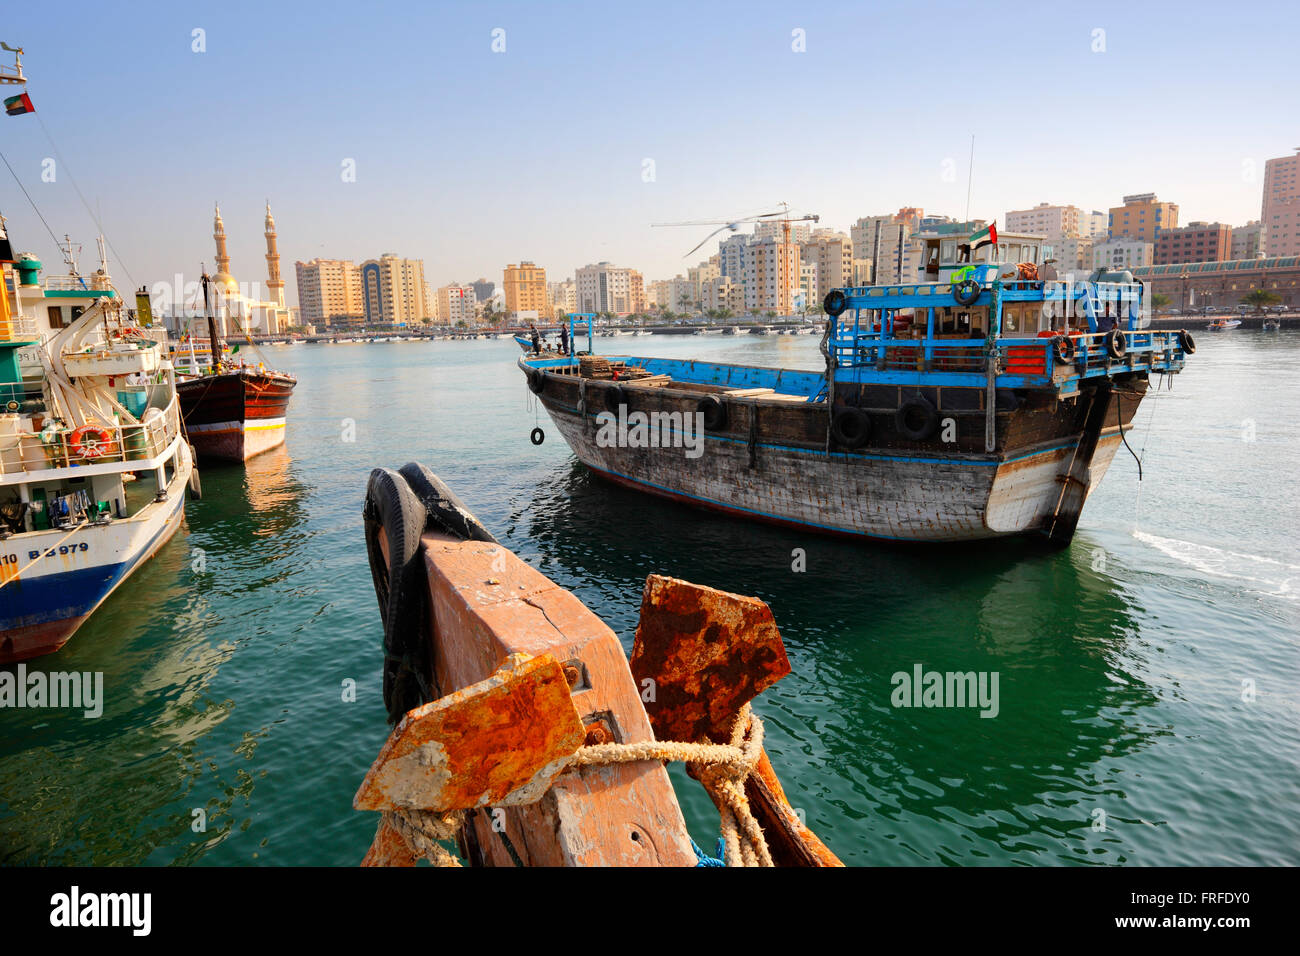 Dubai - Sharjah. Dhow boats in the port in Sharjah Stock Photo